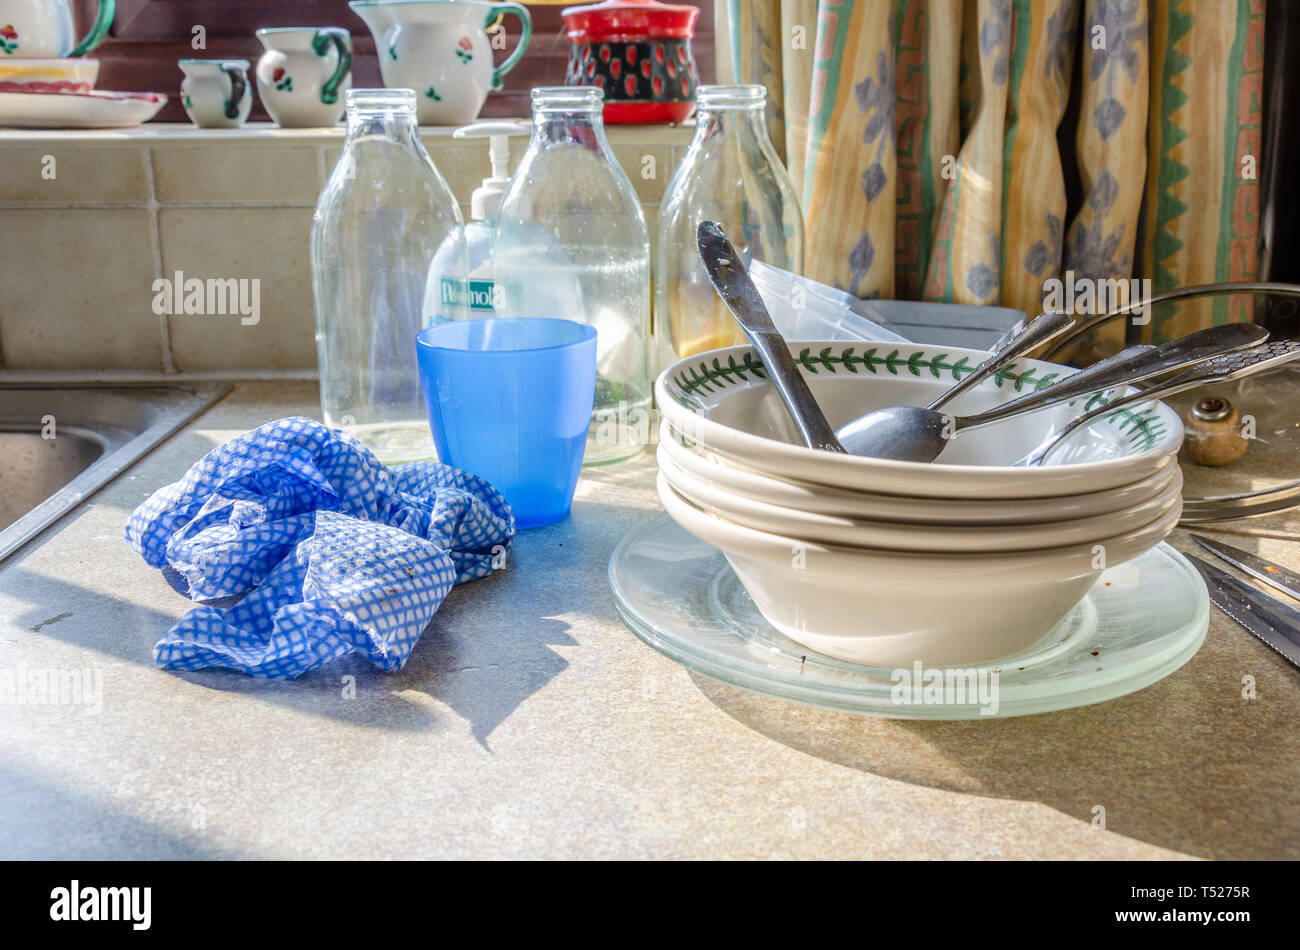 Dirty dishes and plate stacked up on a kitchen worktop next to the kitchen sink ready to wash up. Stock Photo